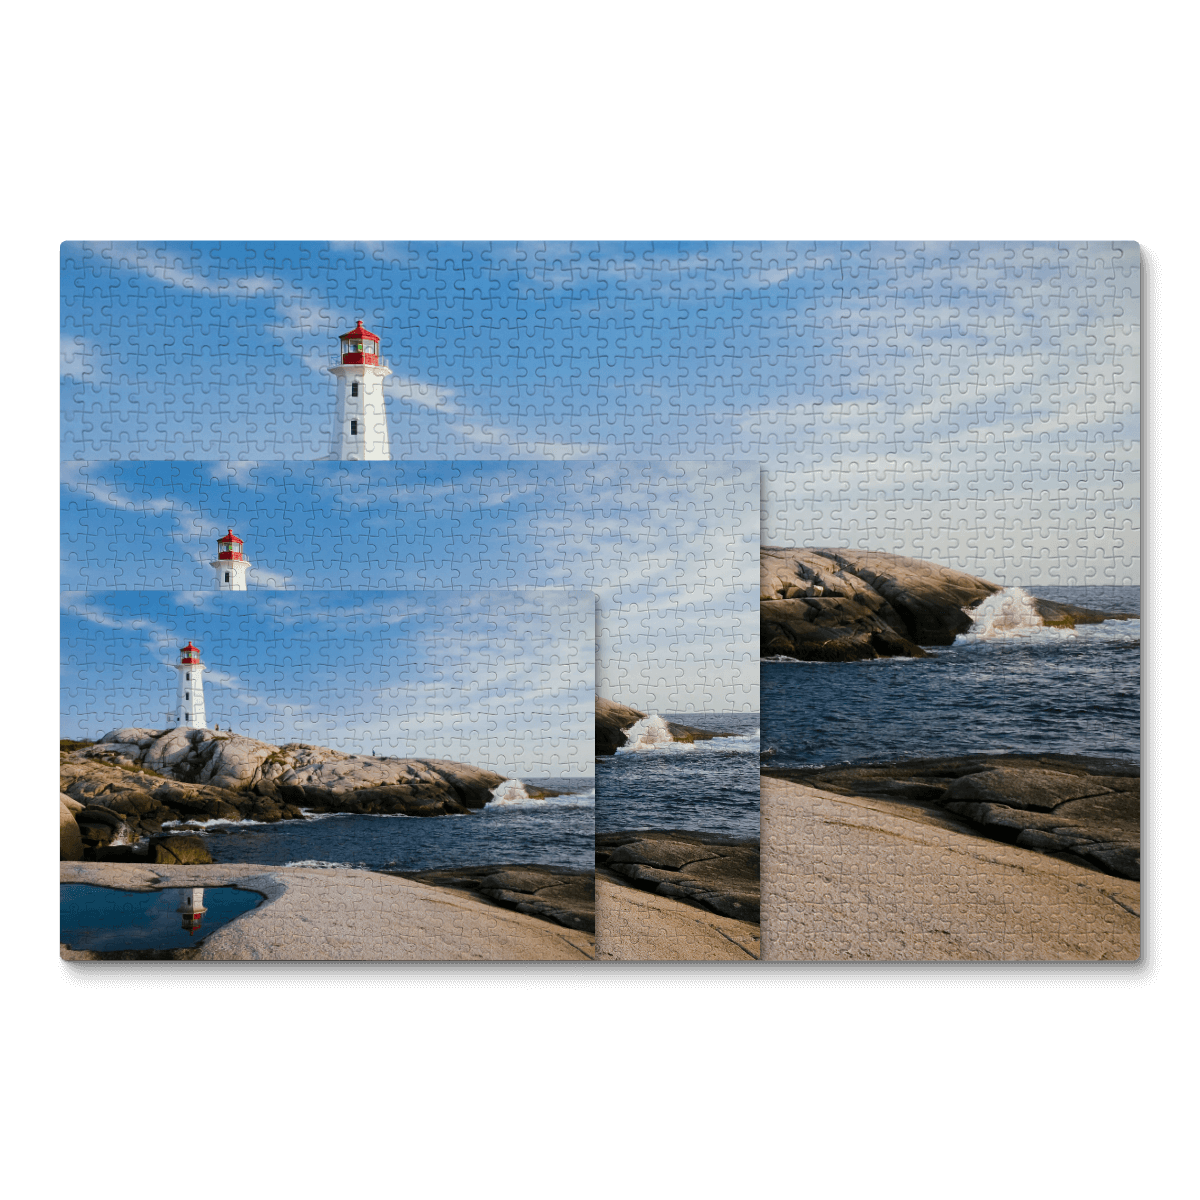 Three jigsaw puzzles with a photo of Peggy's Cove lighthouse, overlapping each other.